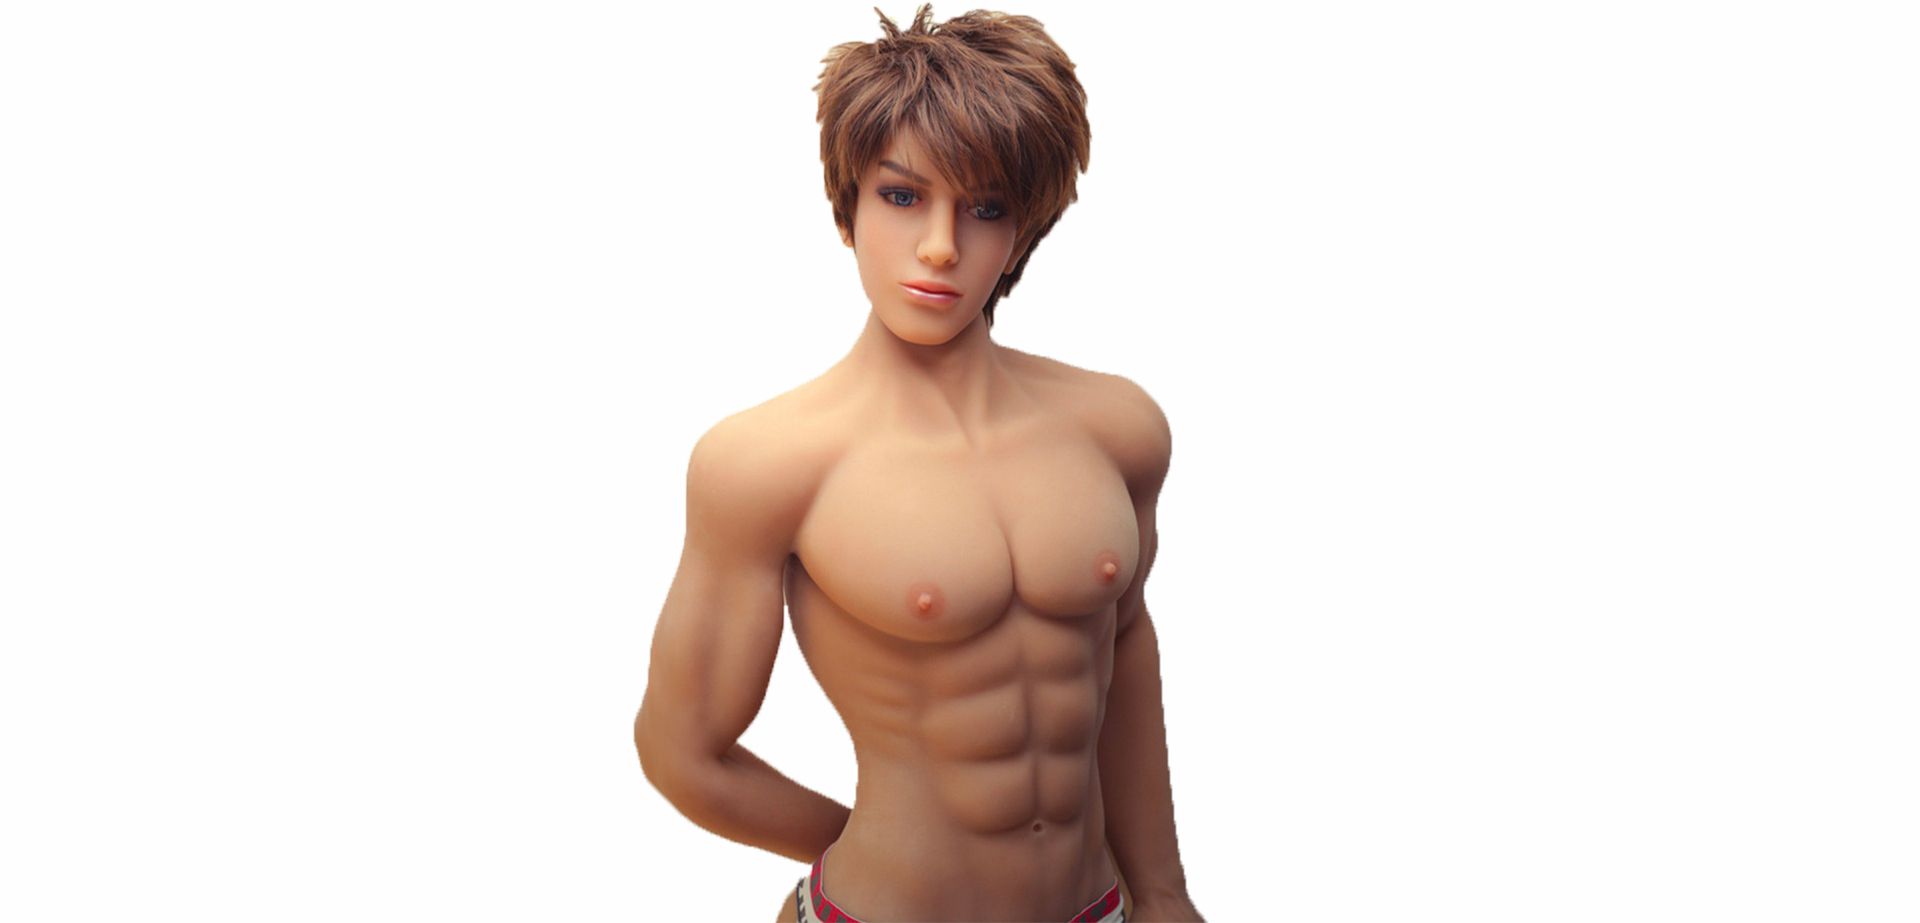 Topless gay sex doll.